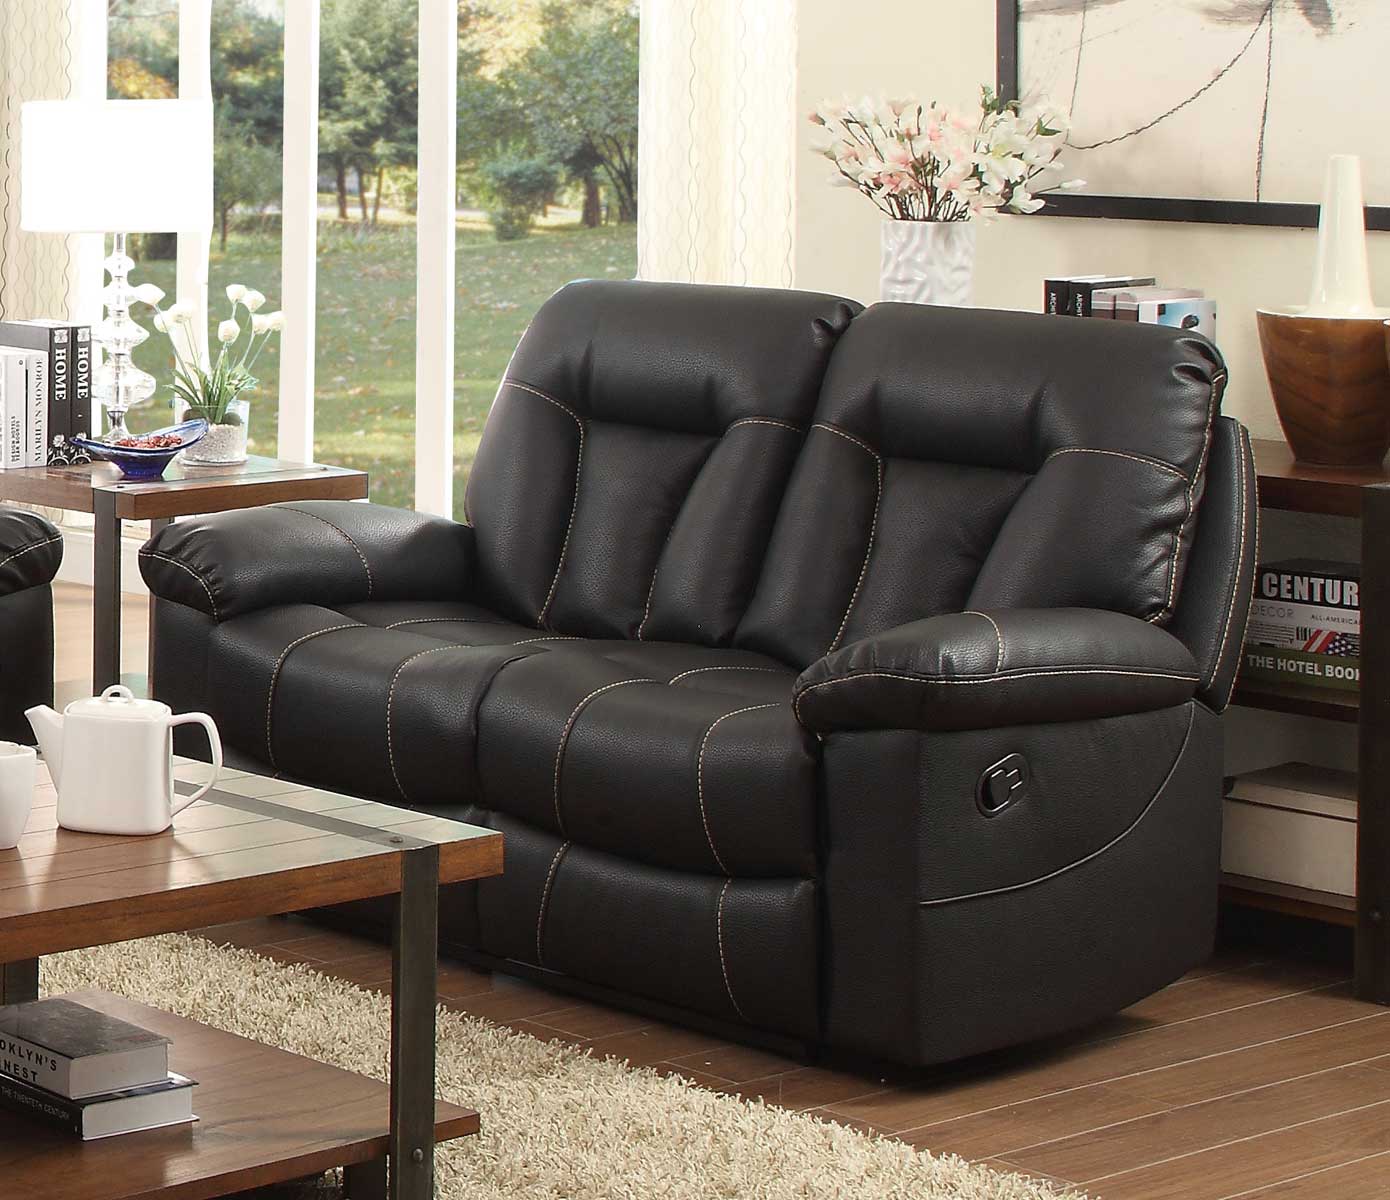 Homelegance Cade Double Reclining Love Seat - Black Bonded Leather Match